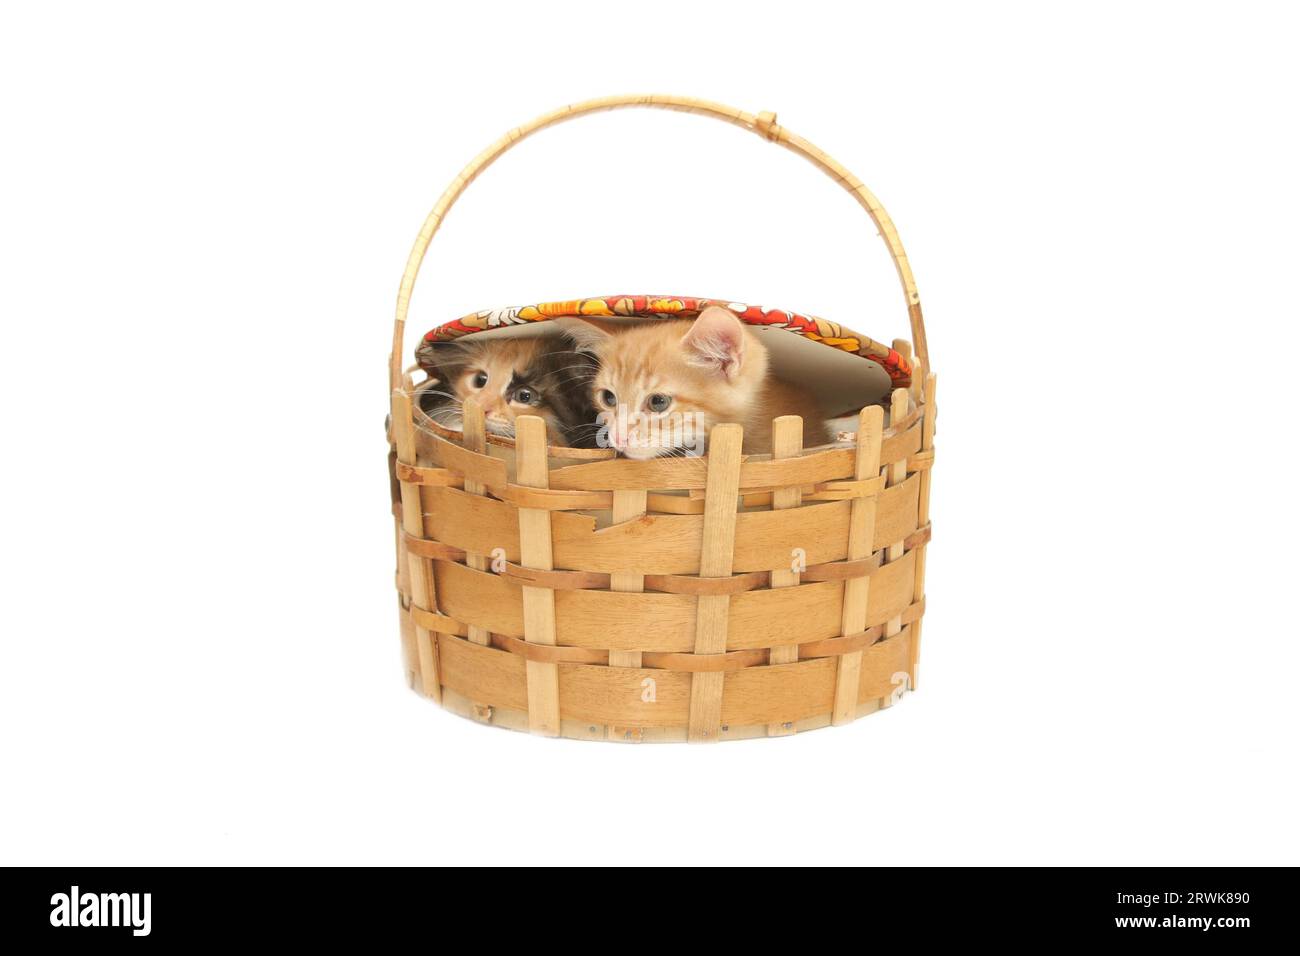 Two small kittens looking from big basket isolated on white background Stock Photo